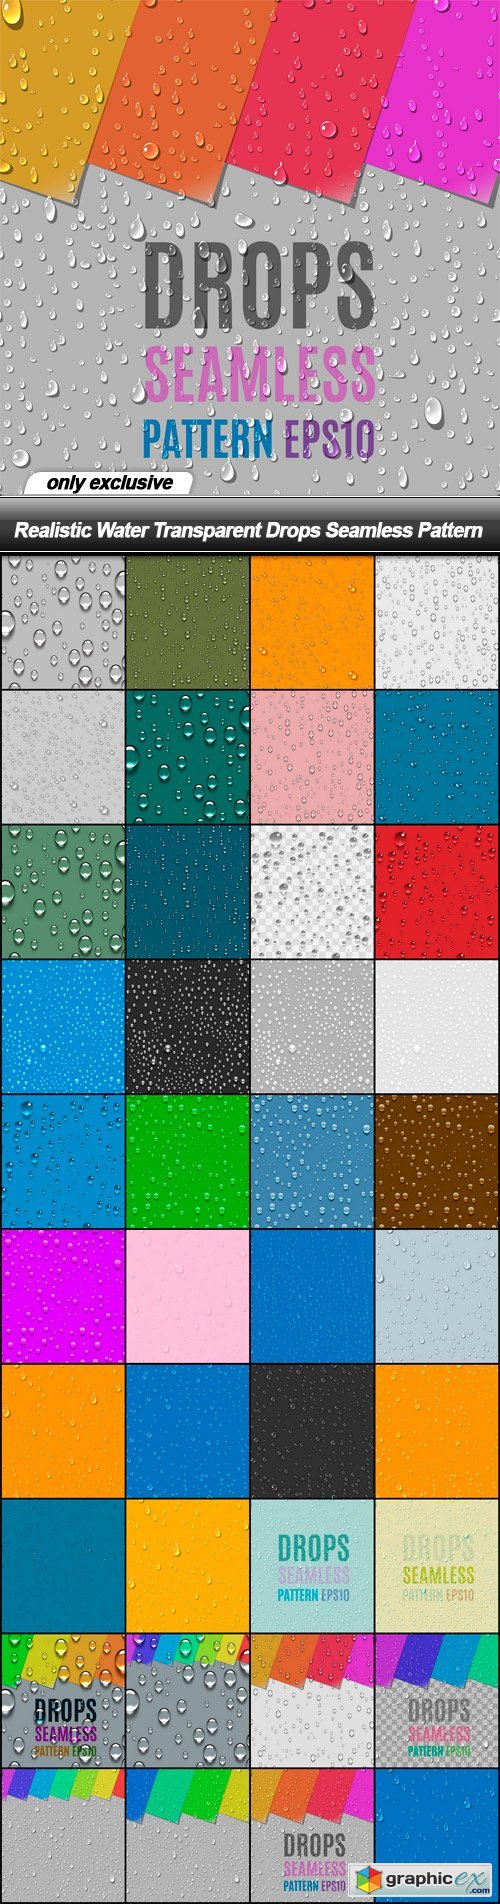 Realistic Water Transparent Drops Seamless Pattern - 40 EPS